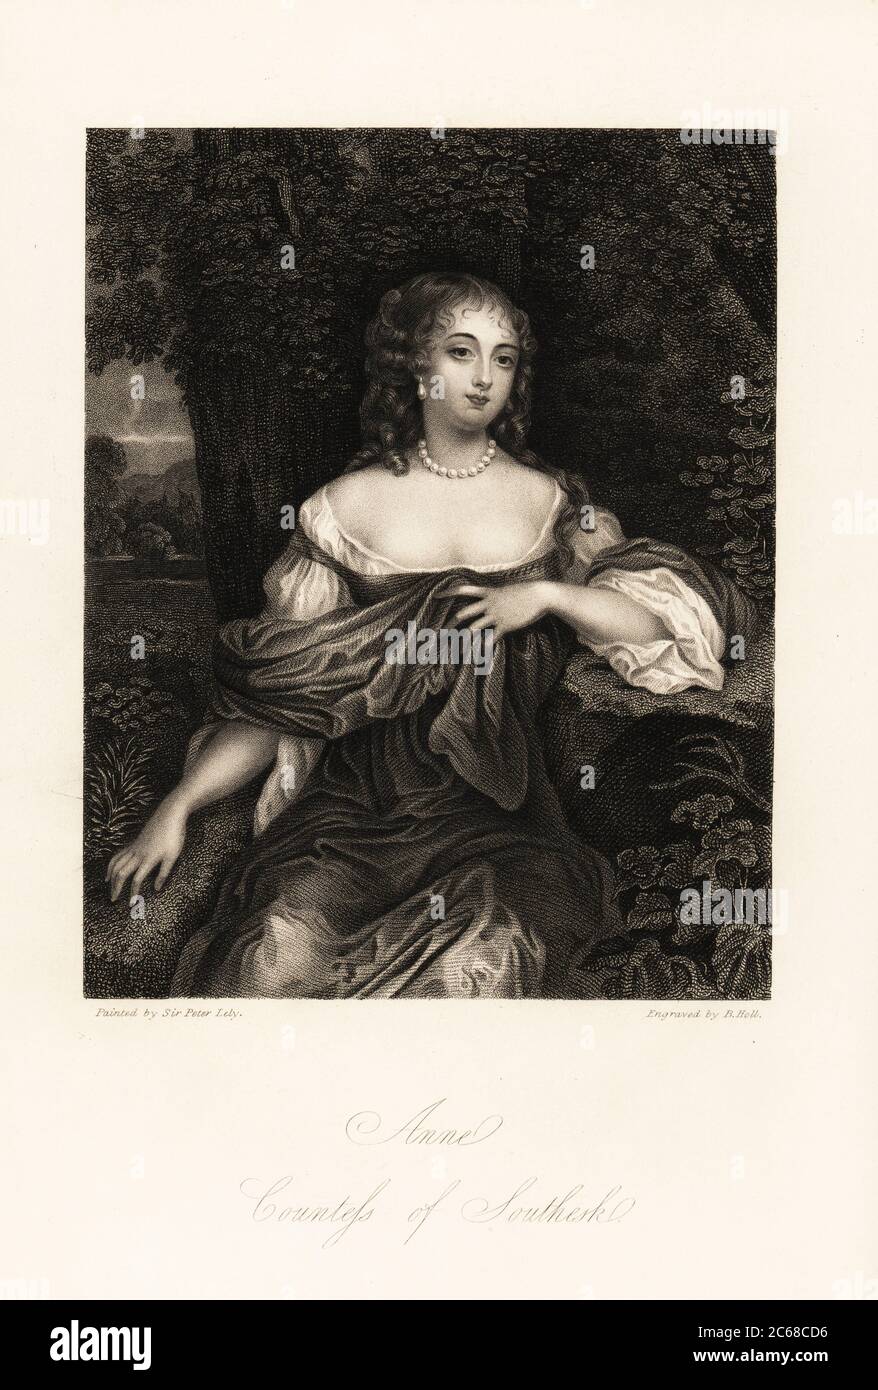 Portrait of Anne Carnegie, Countess of Southesk, wife to James Carnegie, formerly Lady Anne Hamilton, notorious for her affair with the Duke of York, c.1627-1682. Steel engraving by B. Holl after a portrait by Sir Peter Lely from Mrs Anna Jameson’s Memoirs of the Beauties of the Court of King Charles the Second, Henry Coburn, London, 1838 Stock Photo